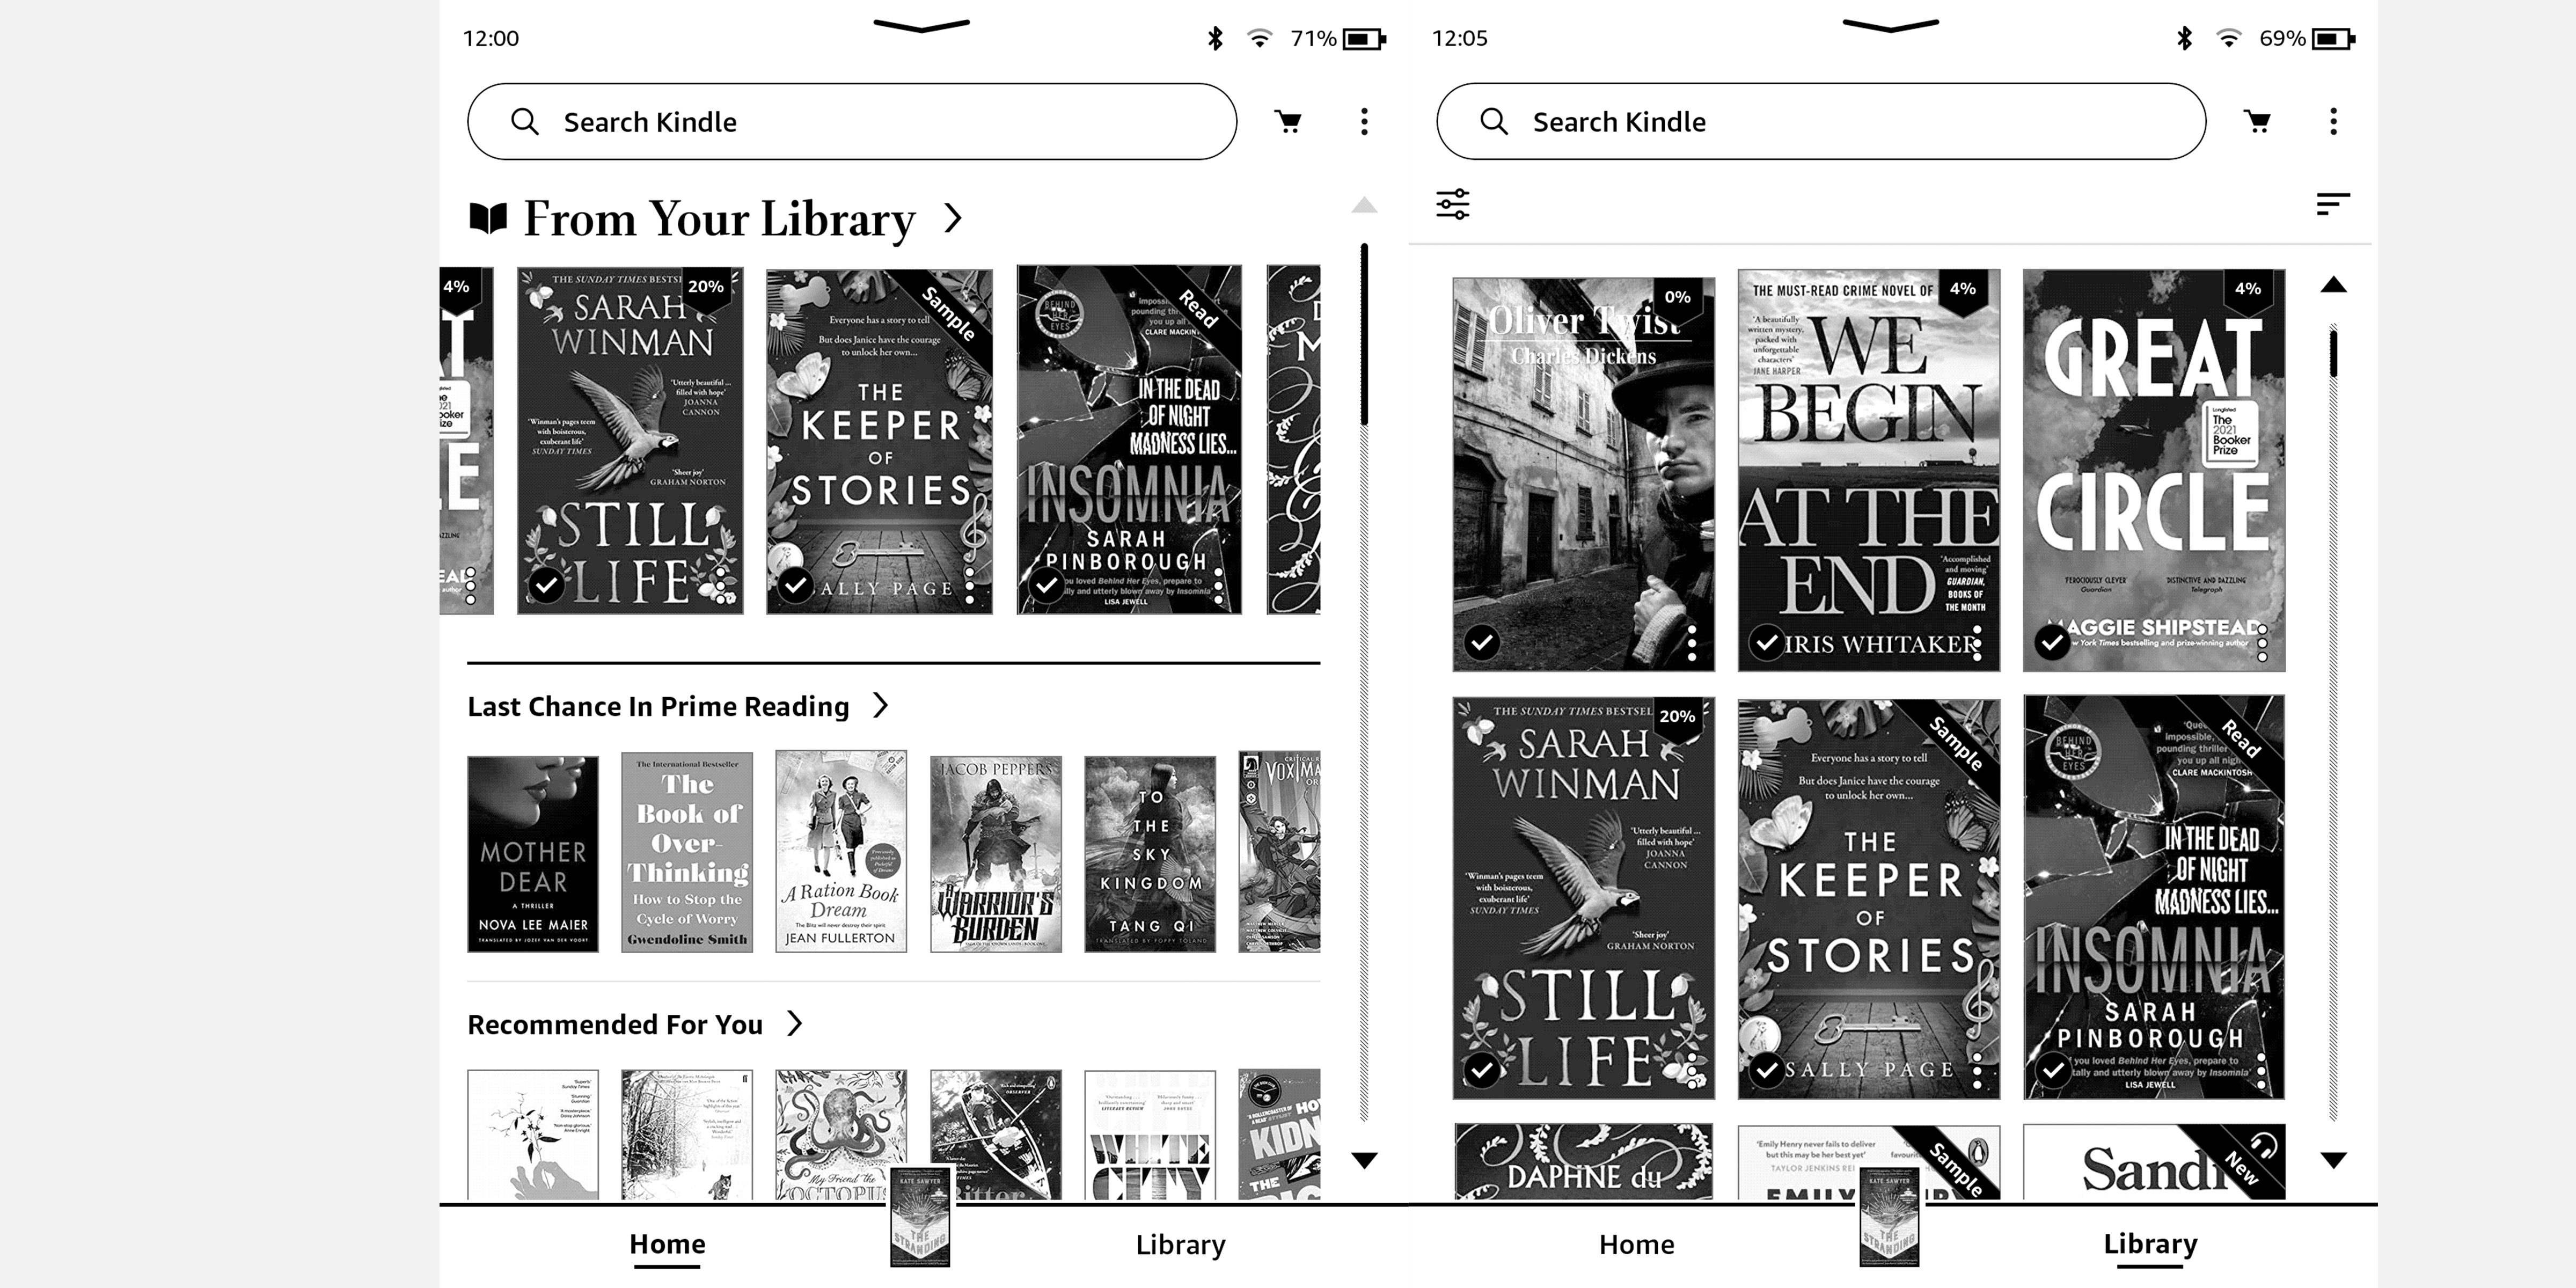 Screenshots of Kindle Home screens showing the option to remove recommendations